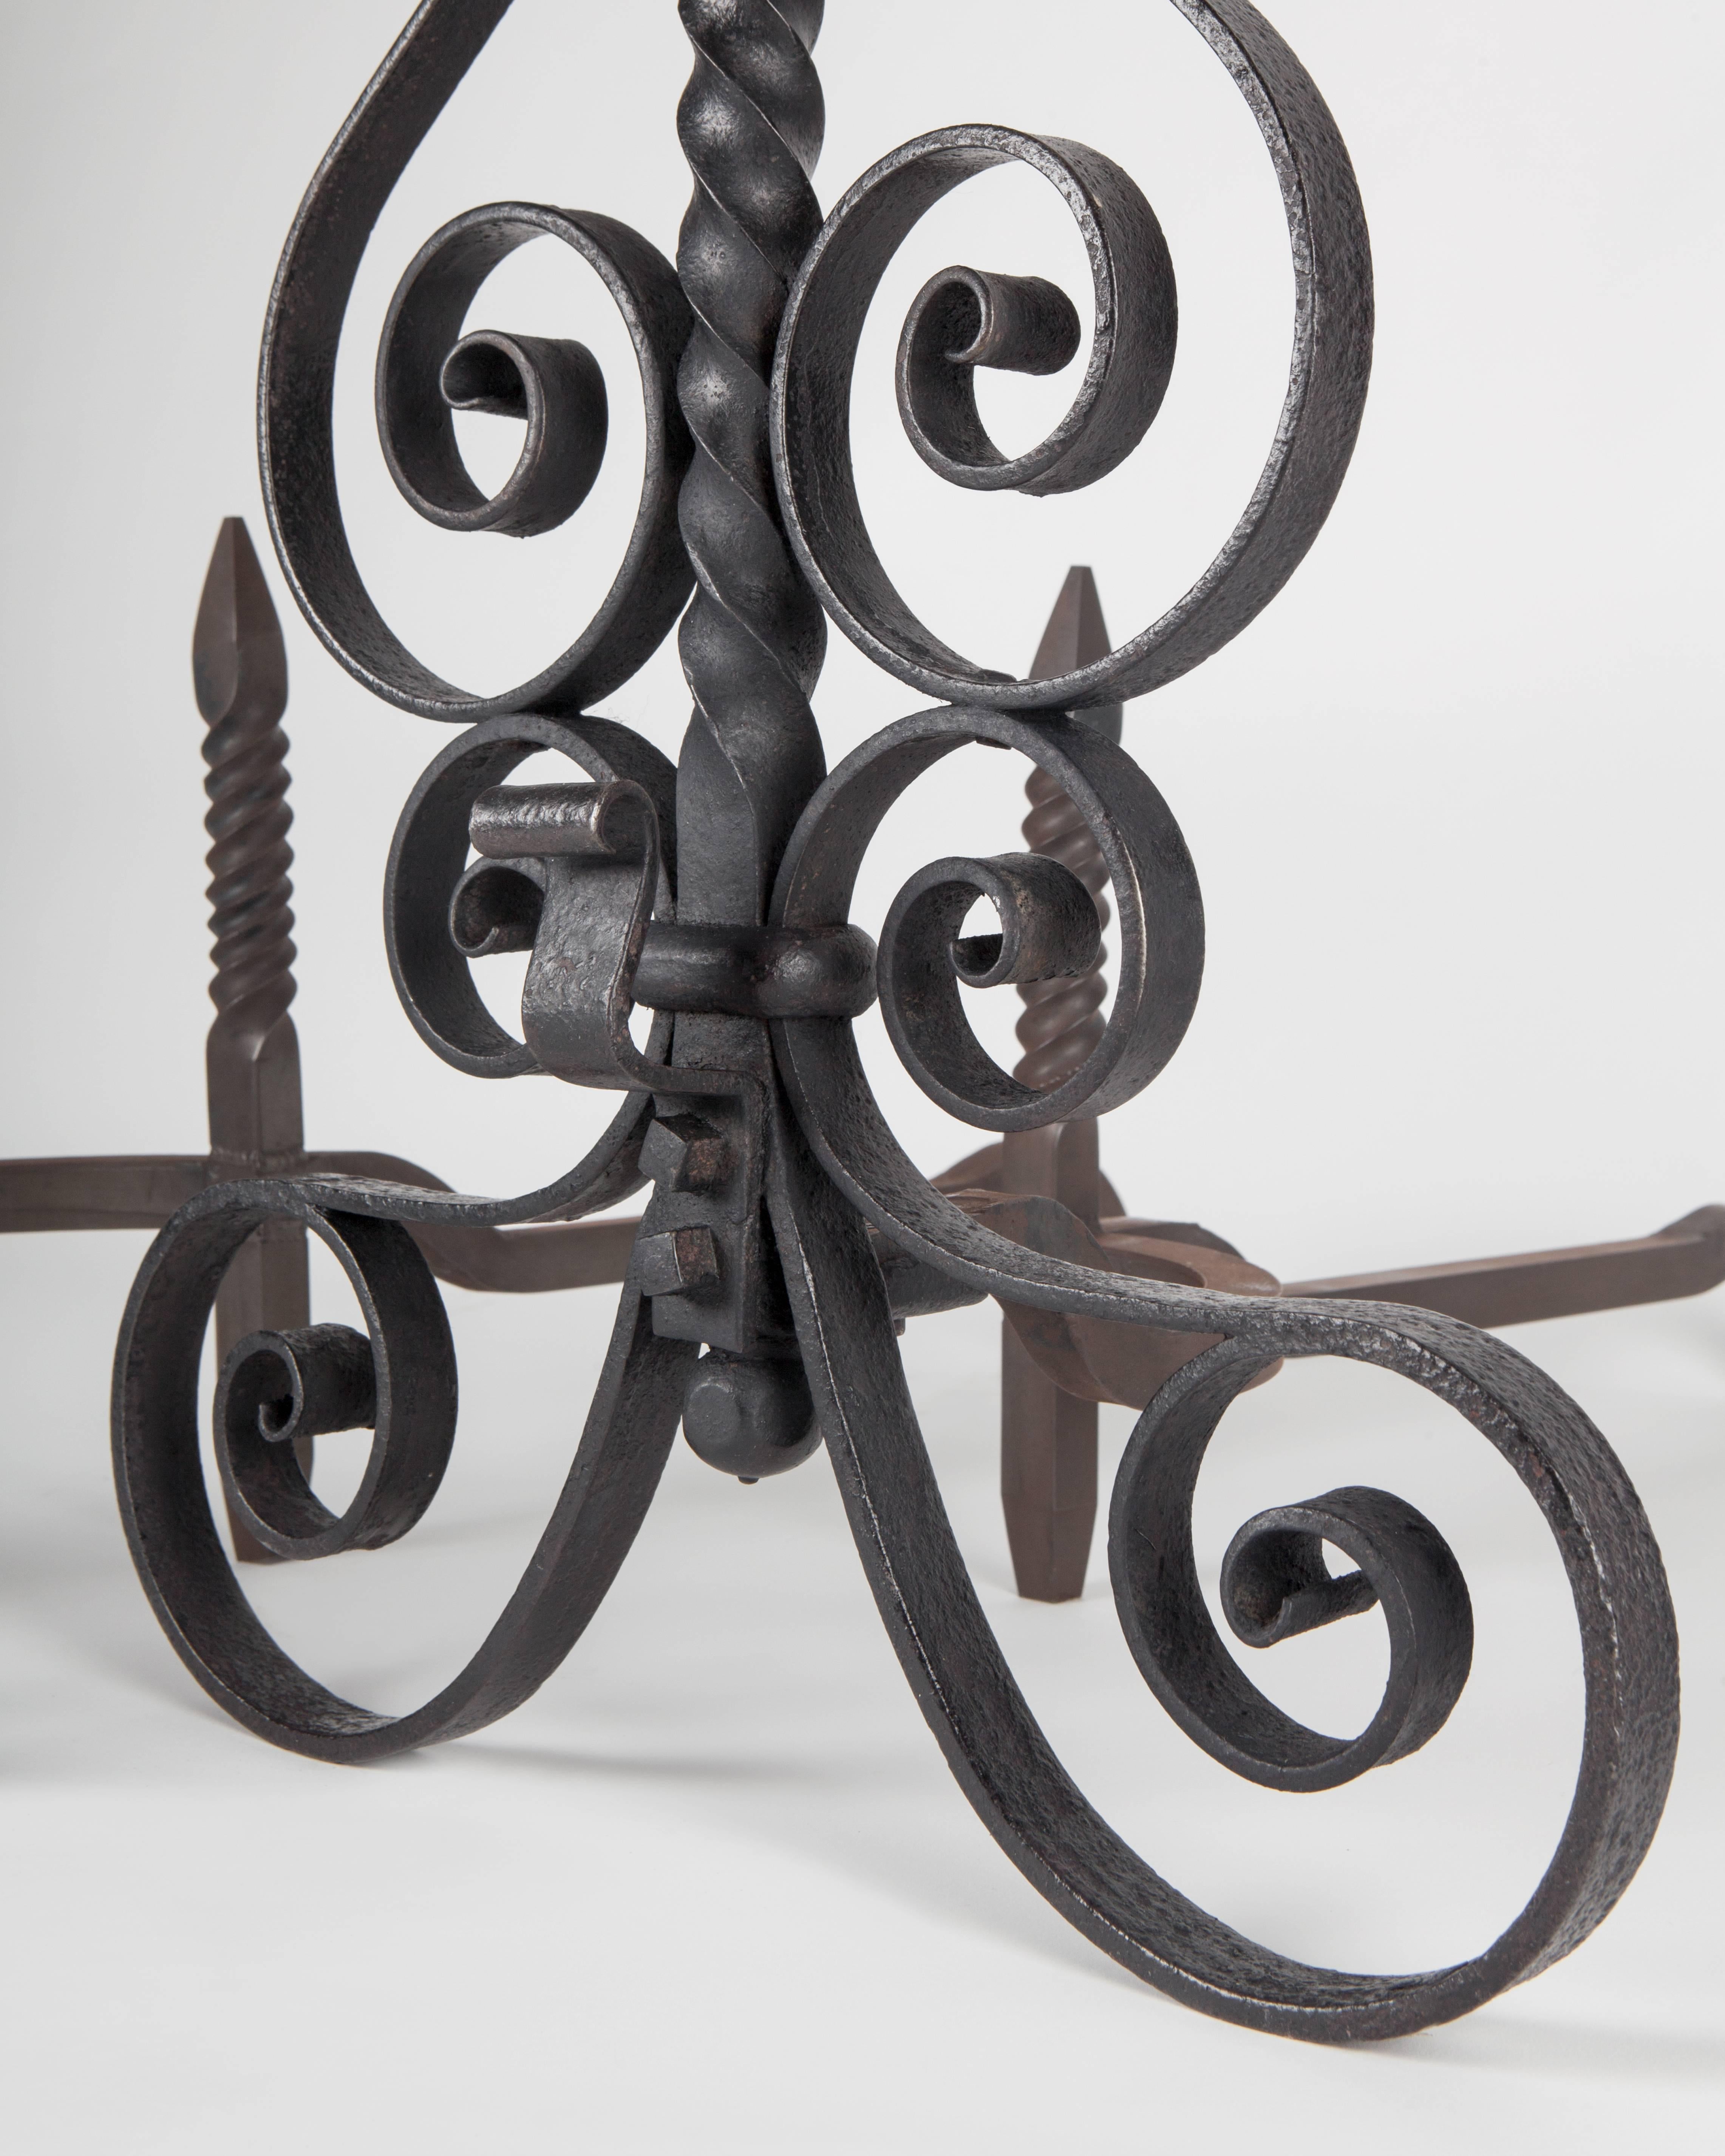 Blackened Wrought Iron Andirons with Scrolls and Twisted Central Fender Crossbar, c. 1880s For Sale